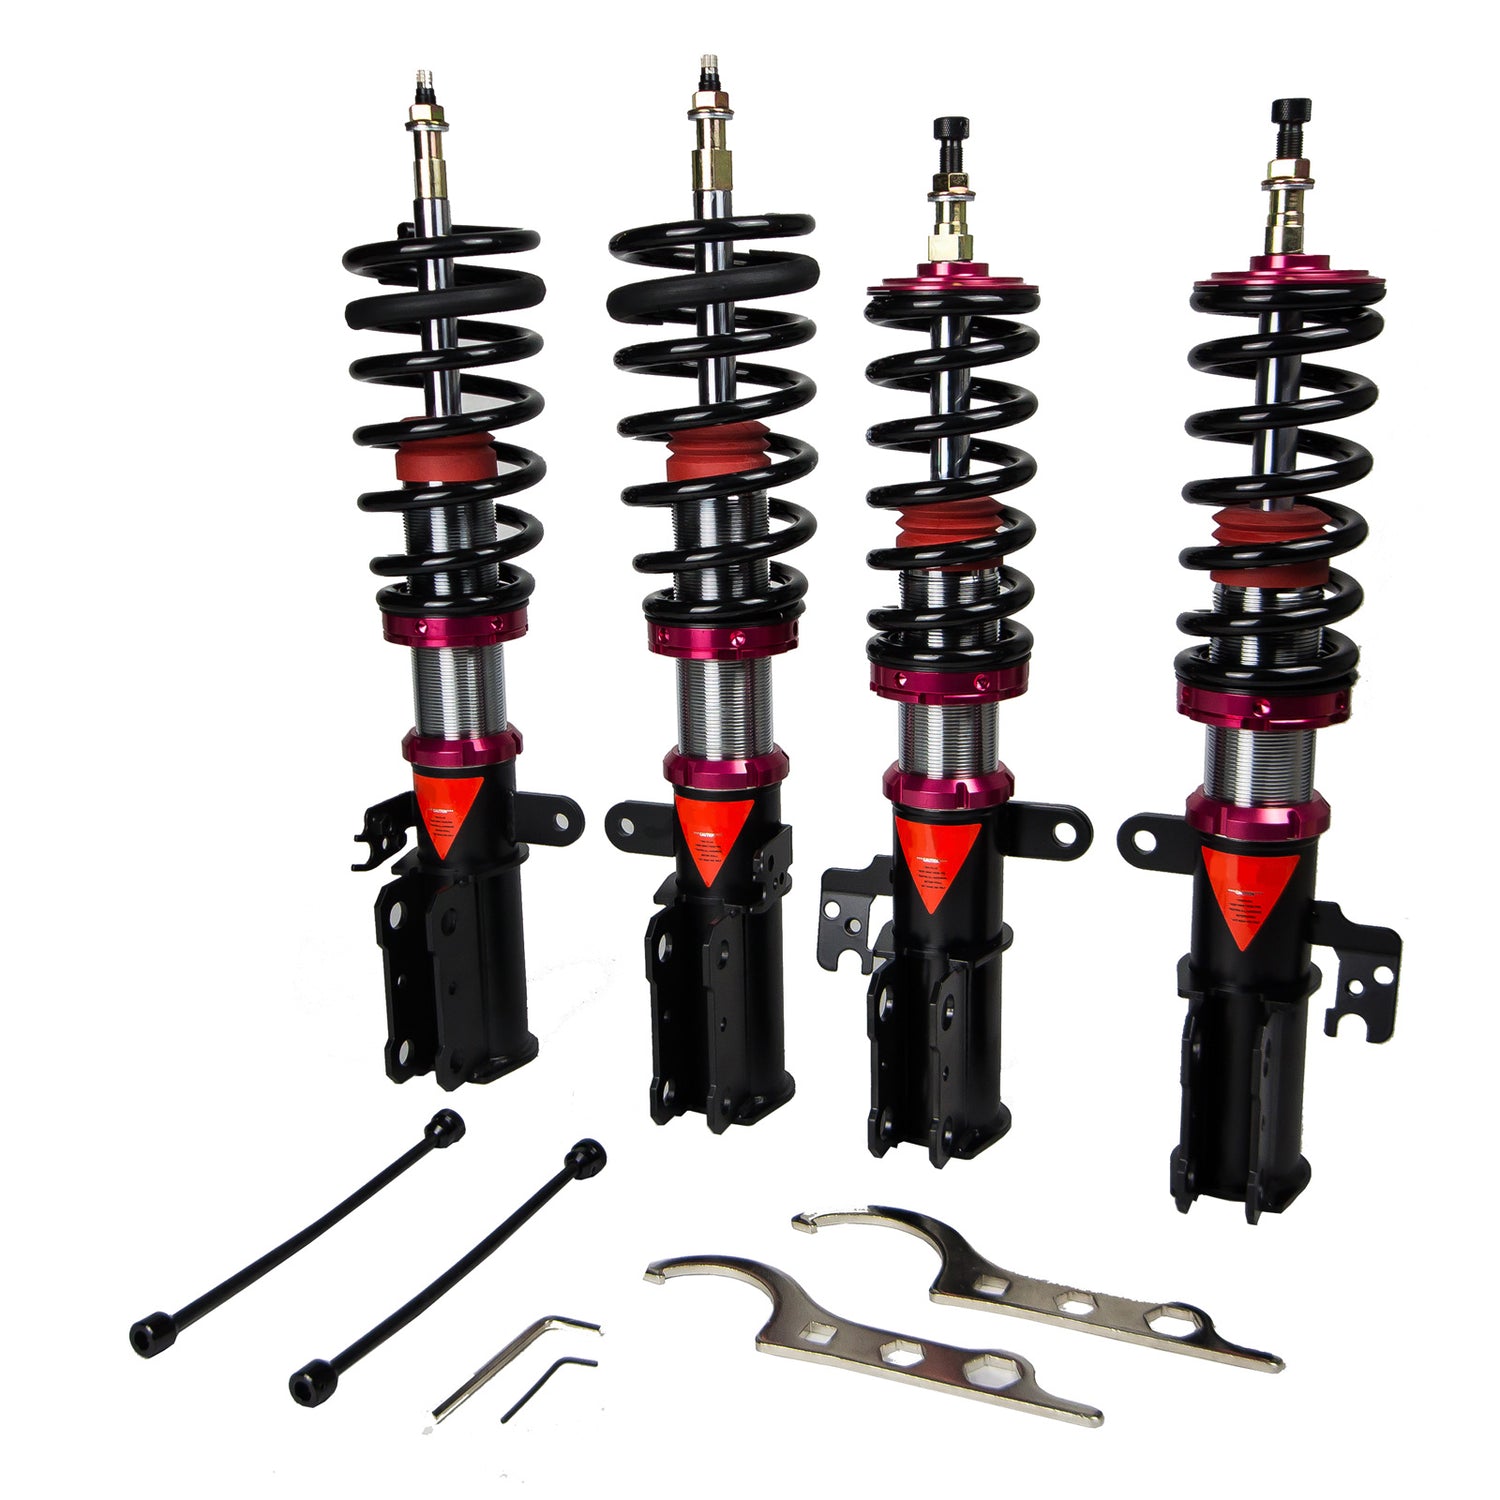 MMX3440-A MAXX Coilovers Lowering Kit, Fully Adjustable, Ride Height, 40 Clicks Rebound Settings, Toyota Camry(XV20/MCV20) 97-01